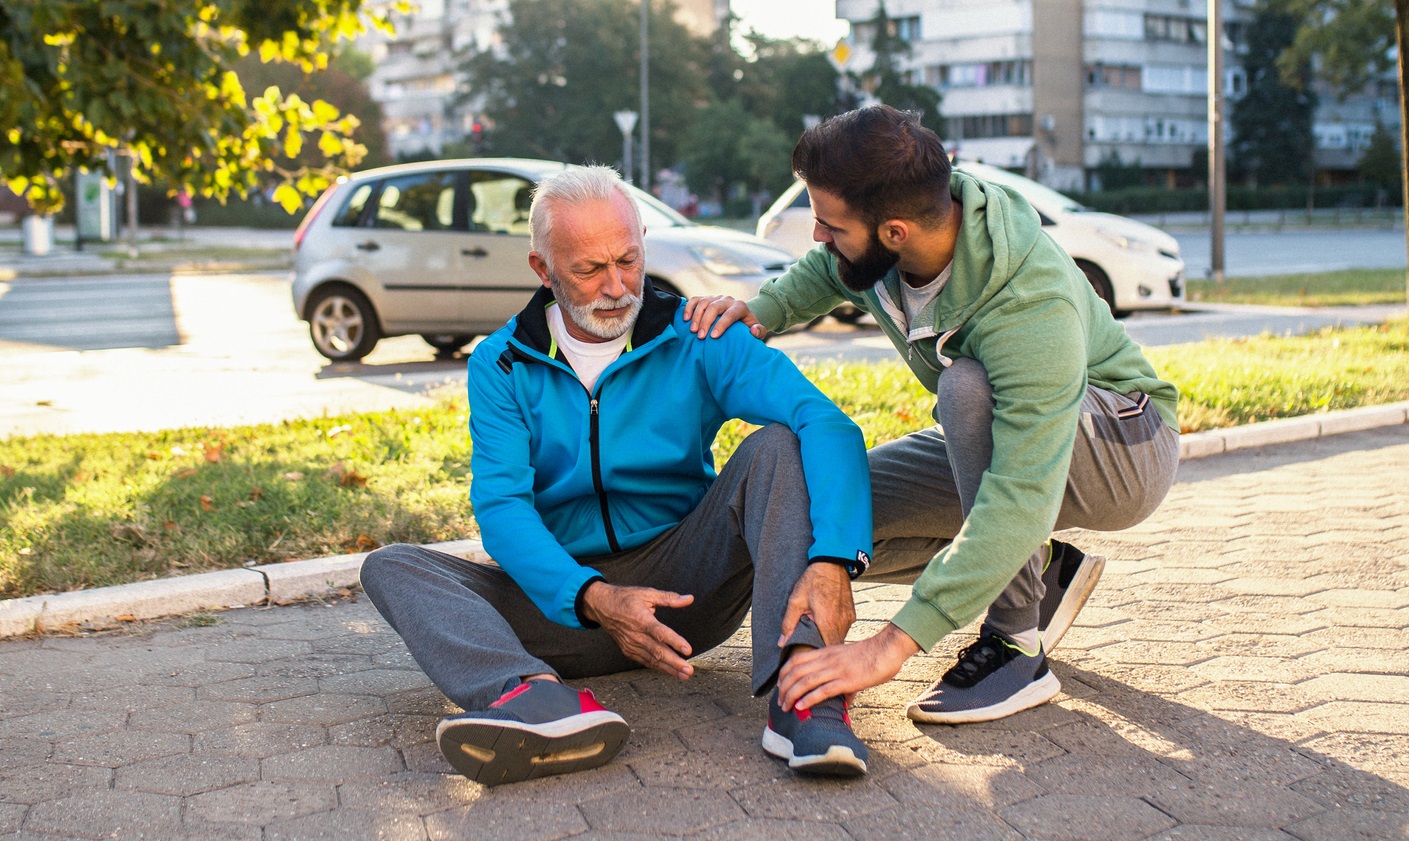 Man holding ankle sitting on sidewalk with another man assisting him